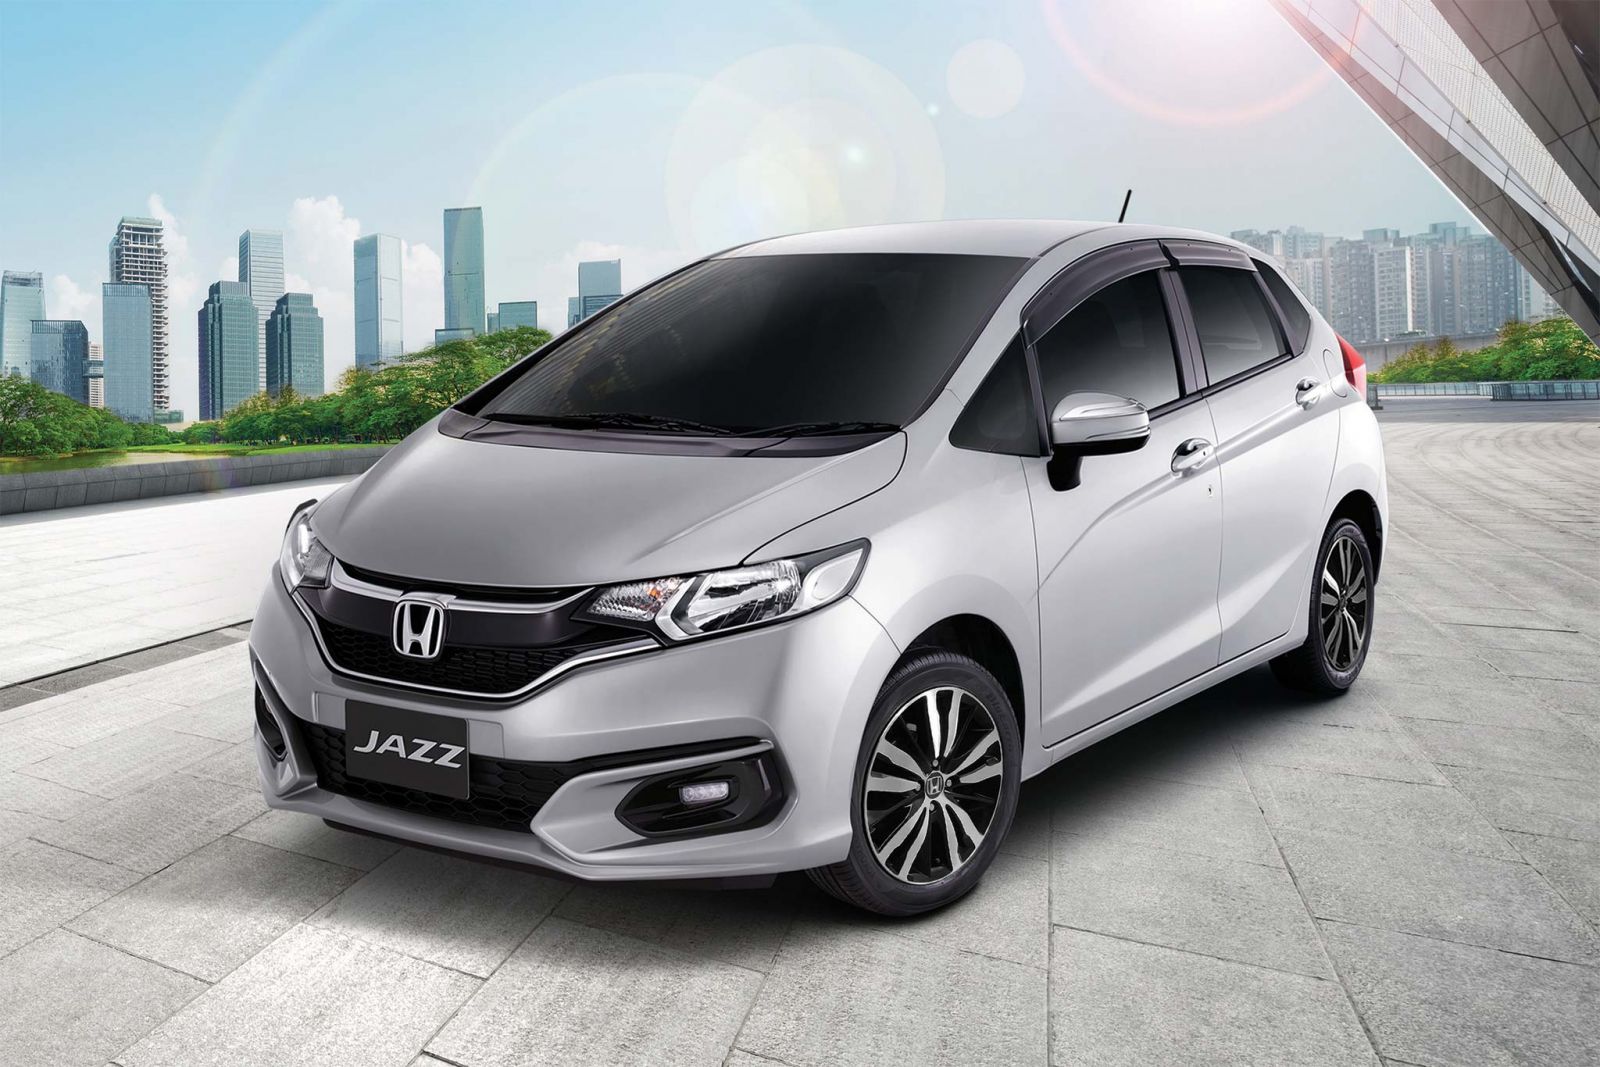 Honda Jazz Colors - Different Looks For Your Vehicles